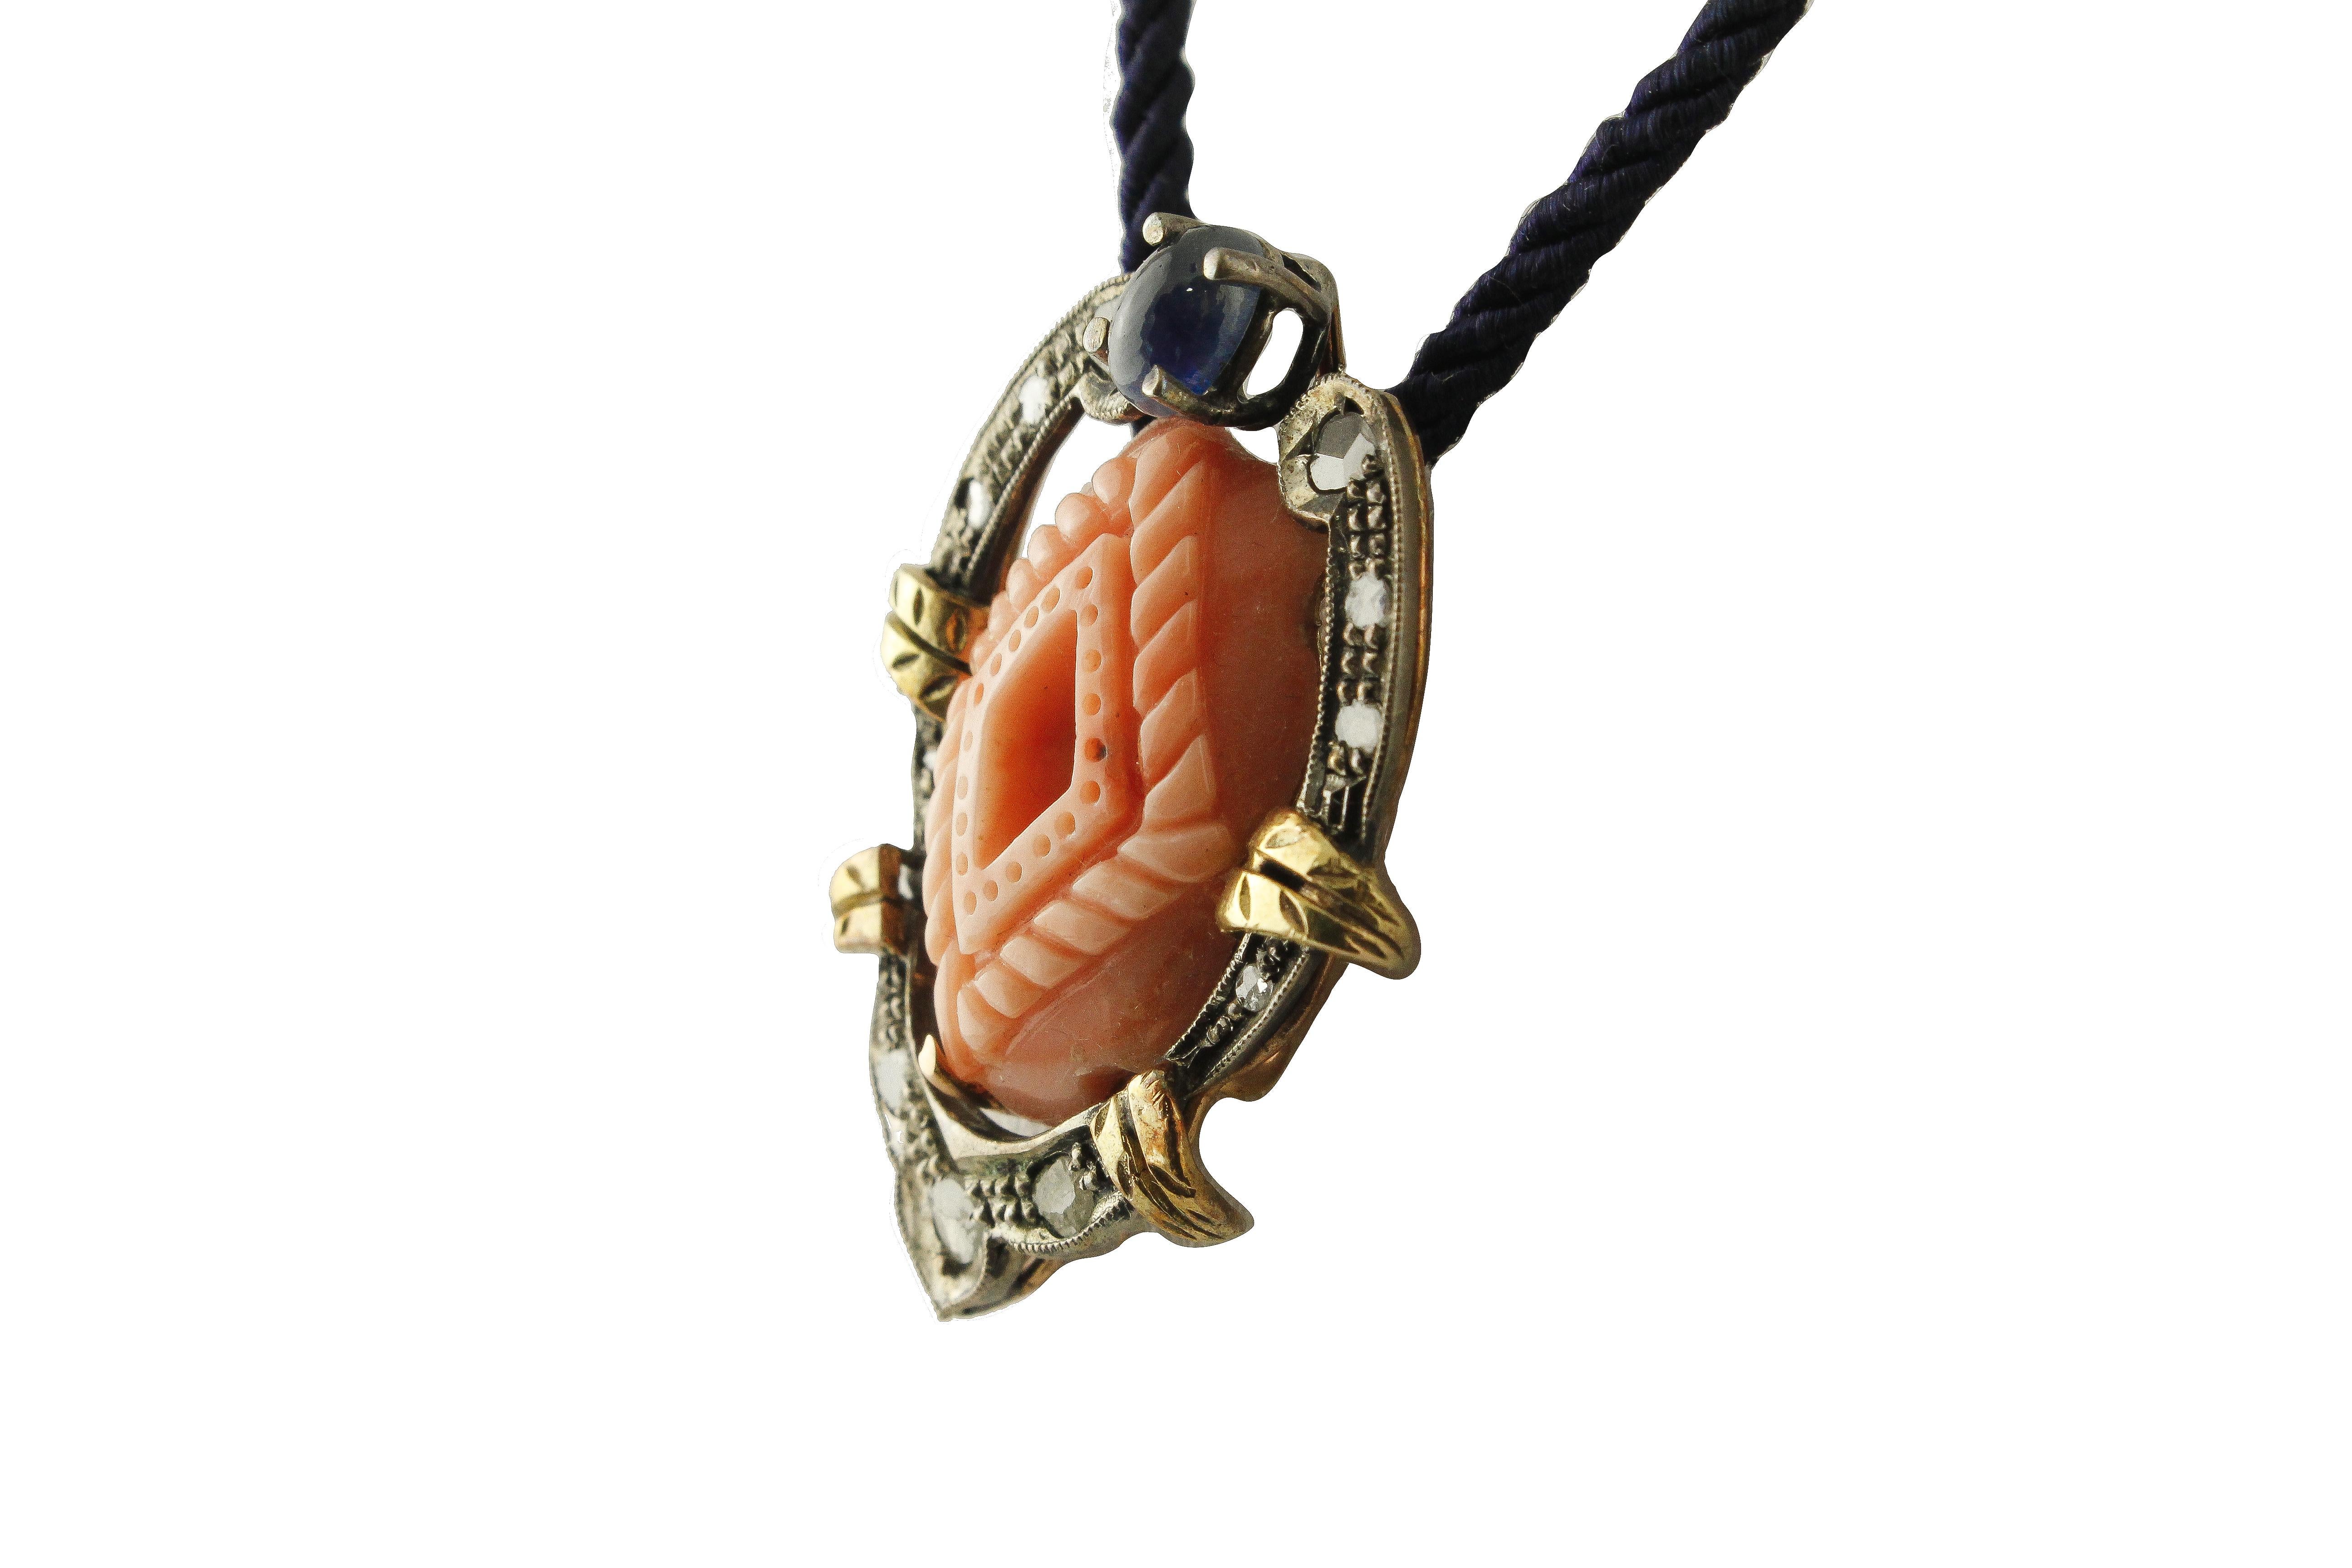 Fashion pendant necklace/ brooch in 14K rose and yellow gold and silver structure composed of a blue sapphire at the top, carved coral in the center surrounded by diamonds and yellow gold leaves detailes
(the chain is only to make photos)
Diamonds